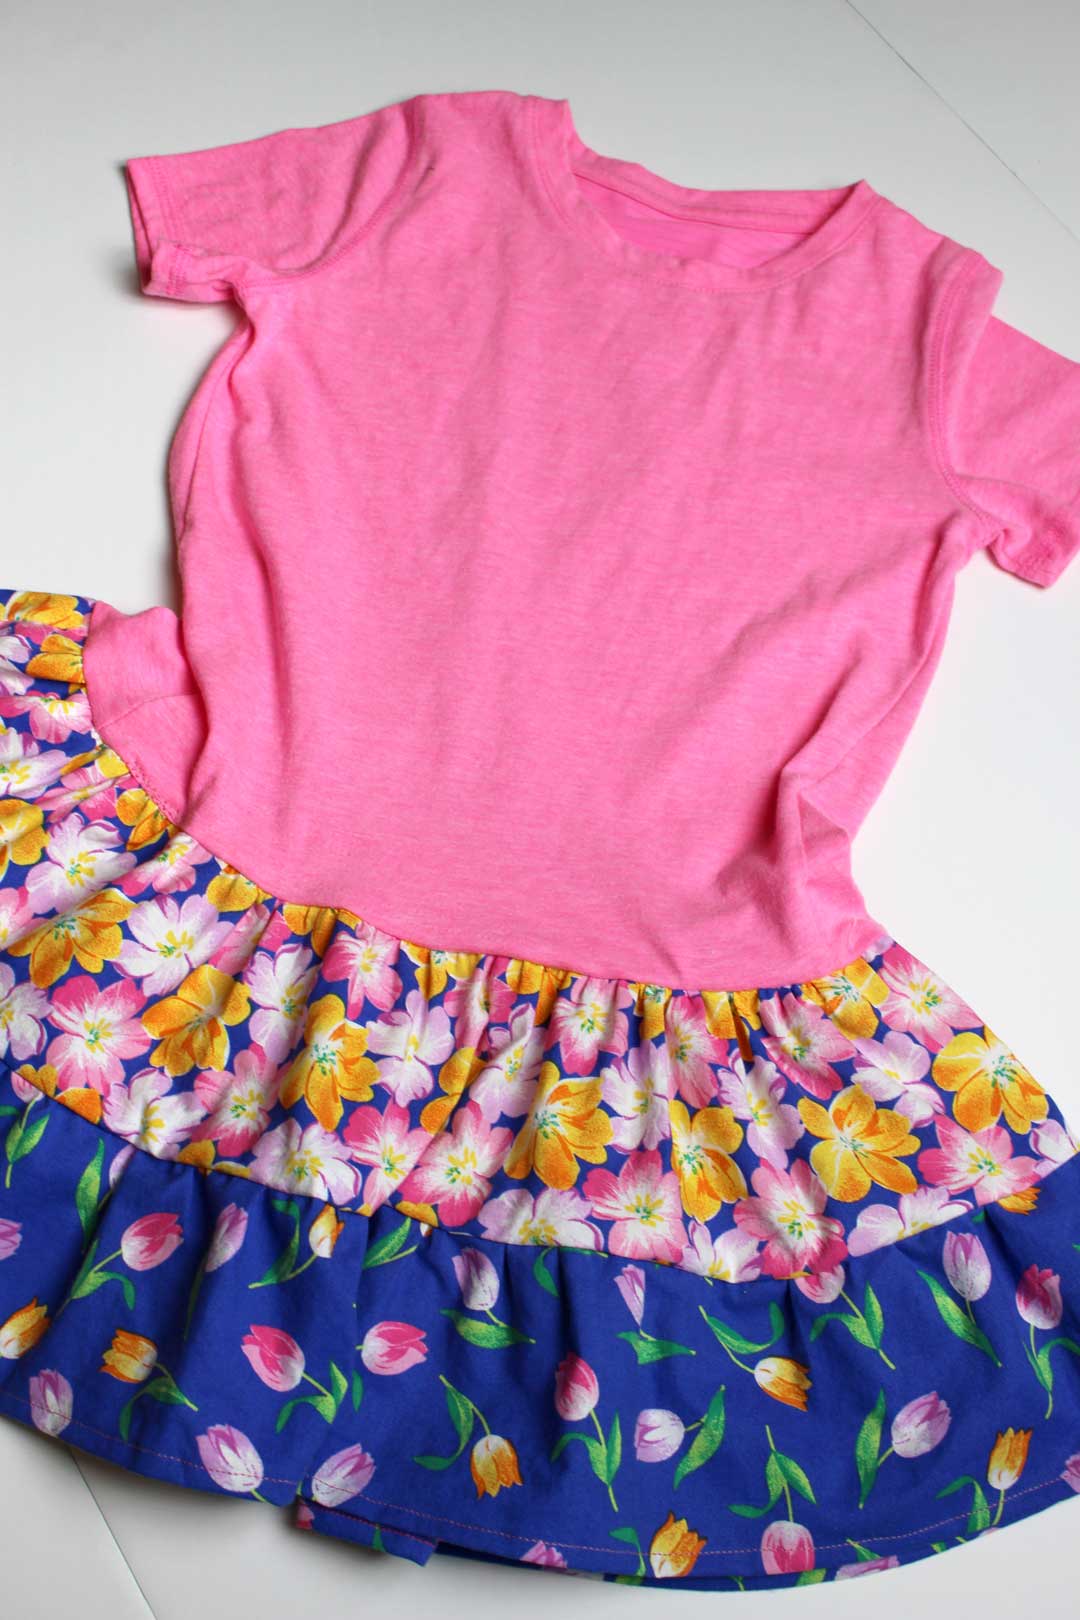 A pink t-shirt sewn to two floral layers of fabric made into a skirt, to make a t-shirt dress.